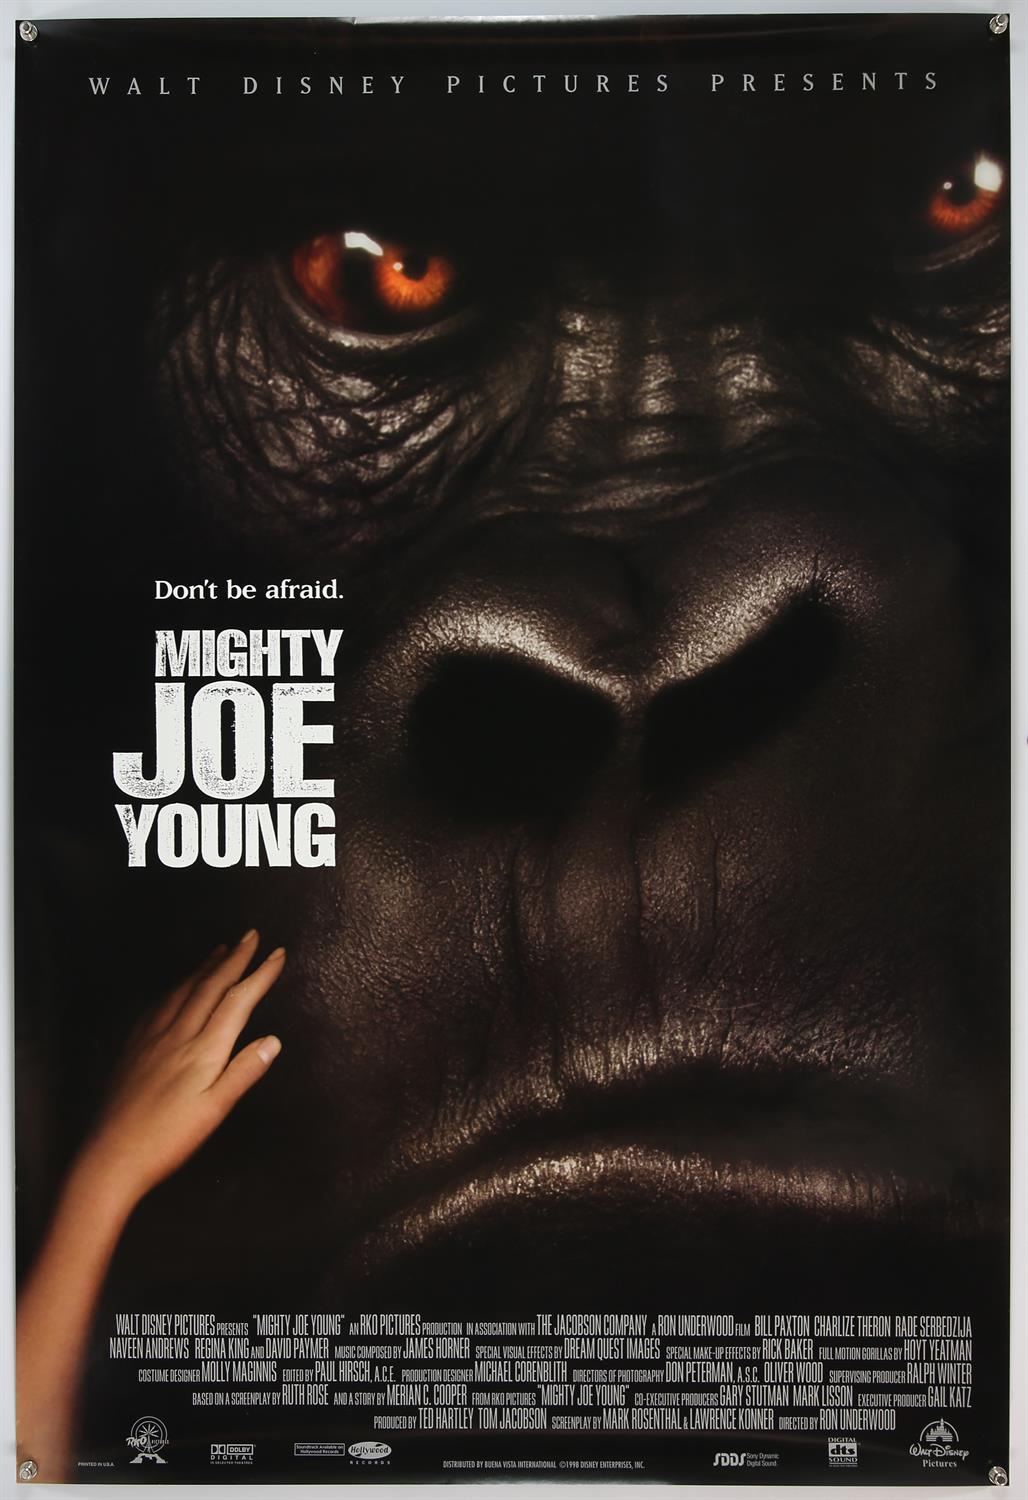 Two Walt Disney One Sheet film posters for Mulan and Mighty Joe Young, rolled, 27 x 40 inches (2). - Image 2 of 2